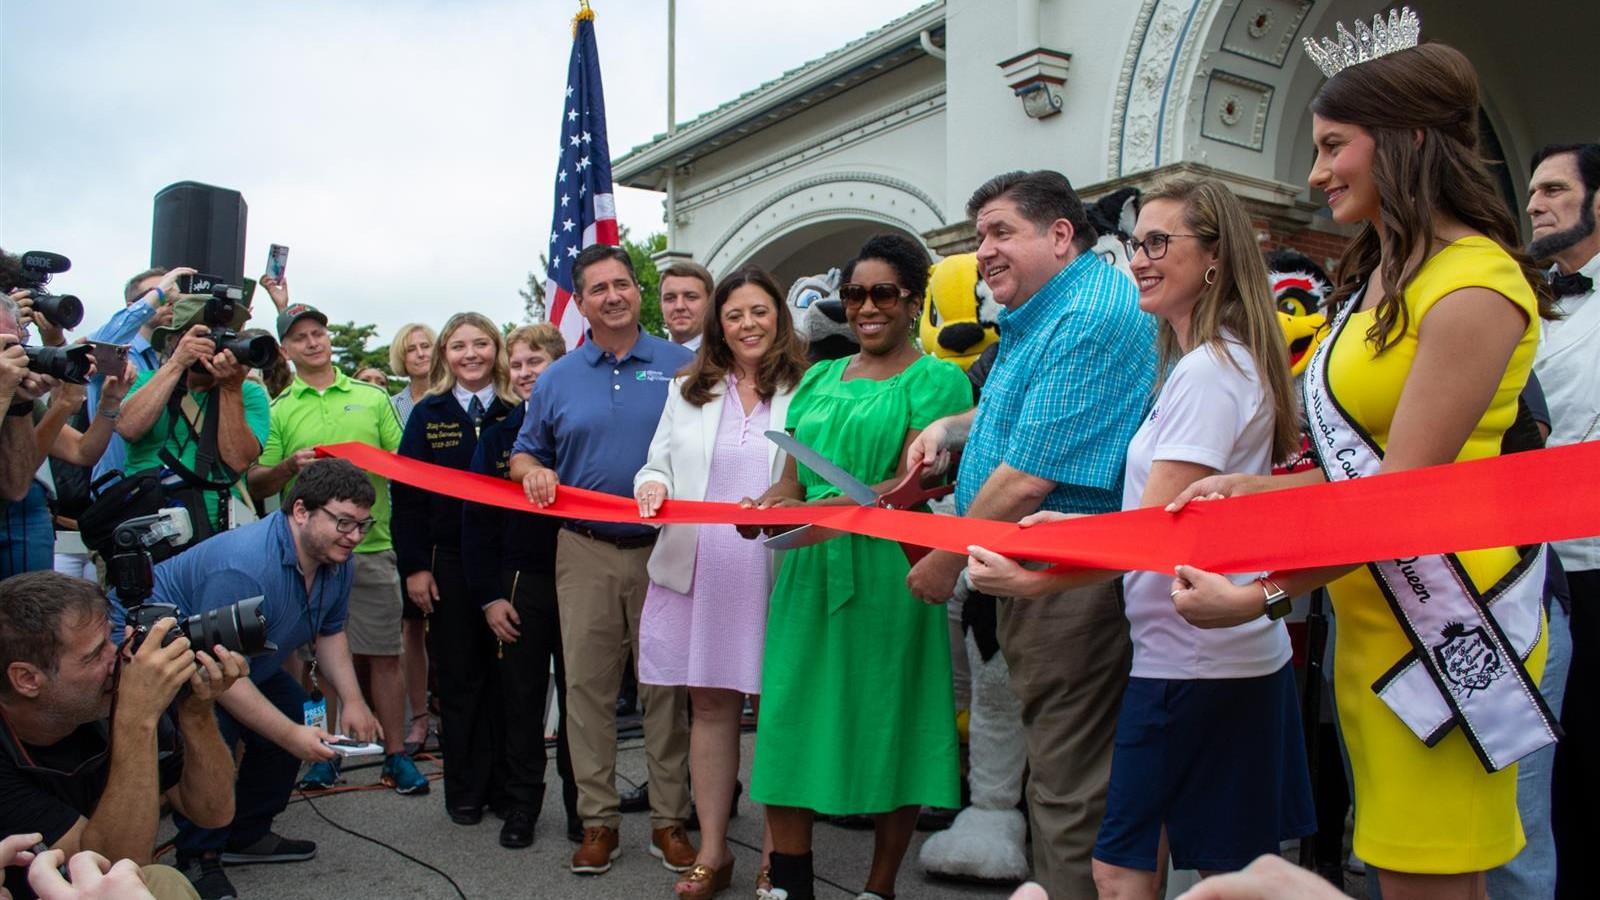 Gov. J.B. Pritzker, organizers of the Illinois State Fair and others cut the ribbon at the main gate of the Illinois State Fairgrounds last month. (Jerry Nowicki / Capitol News Illinois)